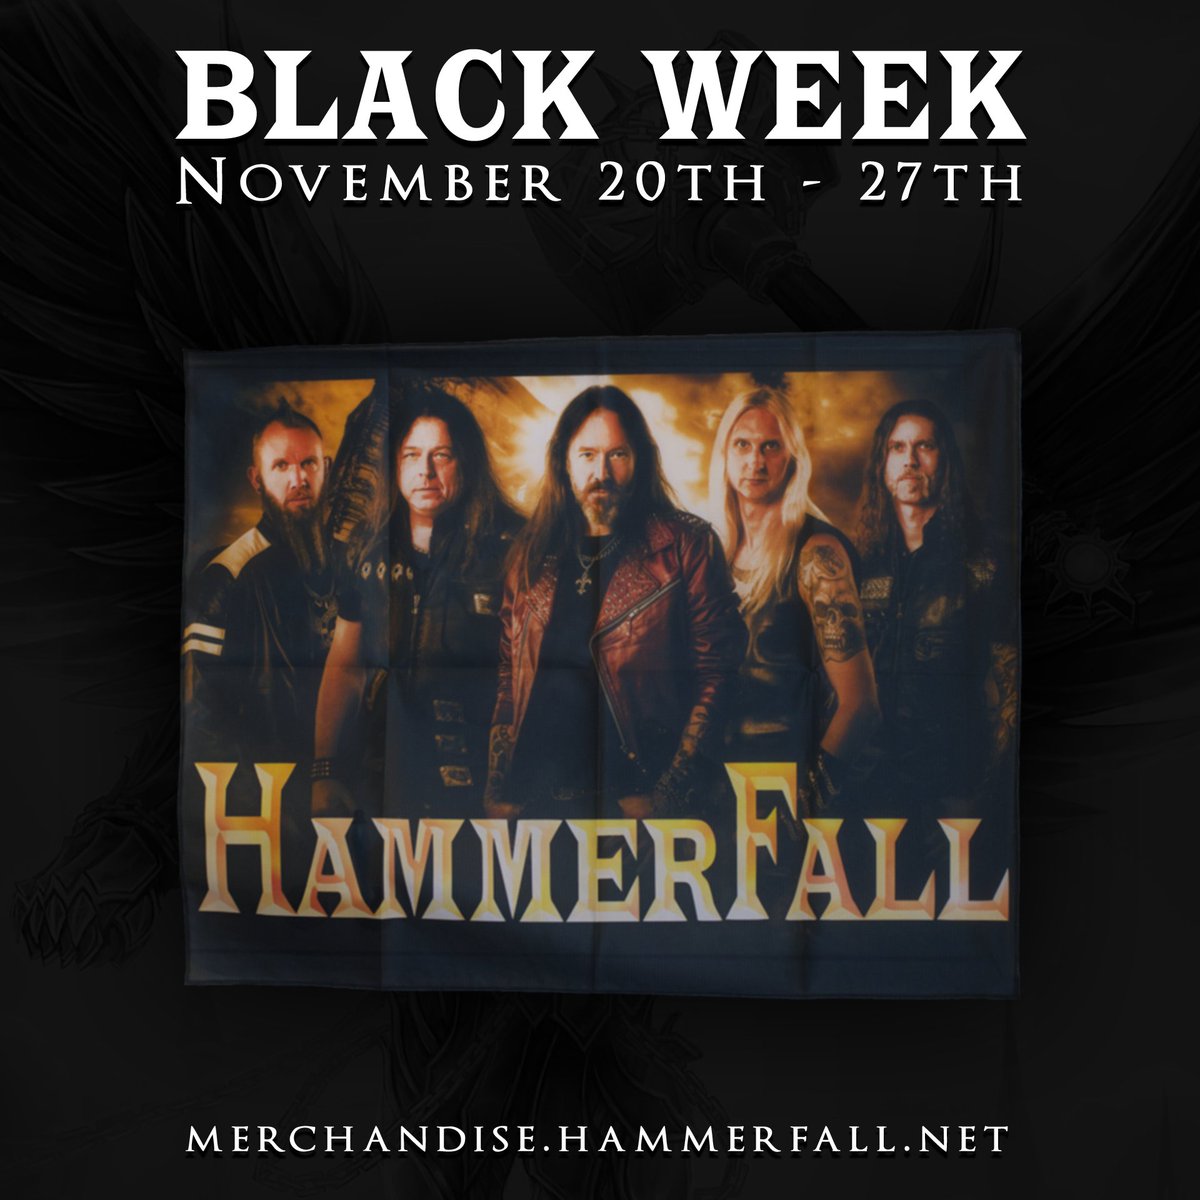 Get 15% OFF on everything during the Black Week Sale! What about a flag for that empty spot on your wall? Shop at merchandise.hammerfall.net #HammerFall #OscarDronjak #JoacimCans #FredrikLarsson #PontusNorgren #DavidWallin #HeavyMetal #Merchandise #BlackWeek #BlackFriday